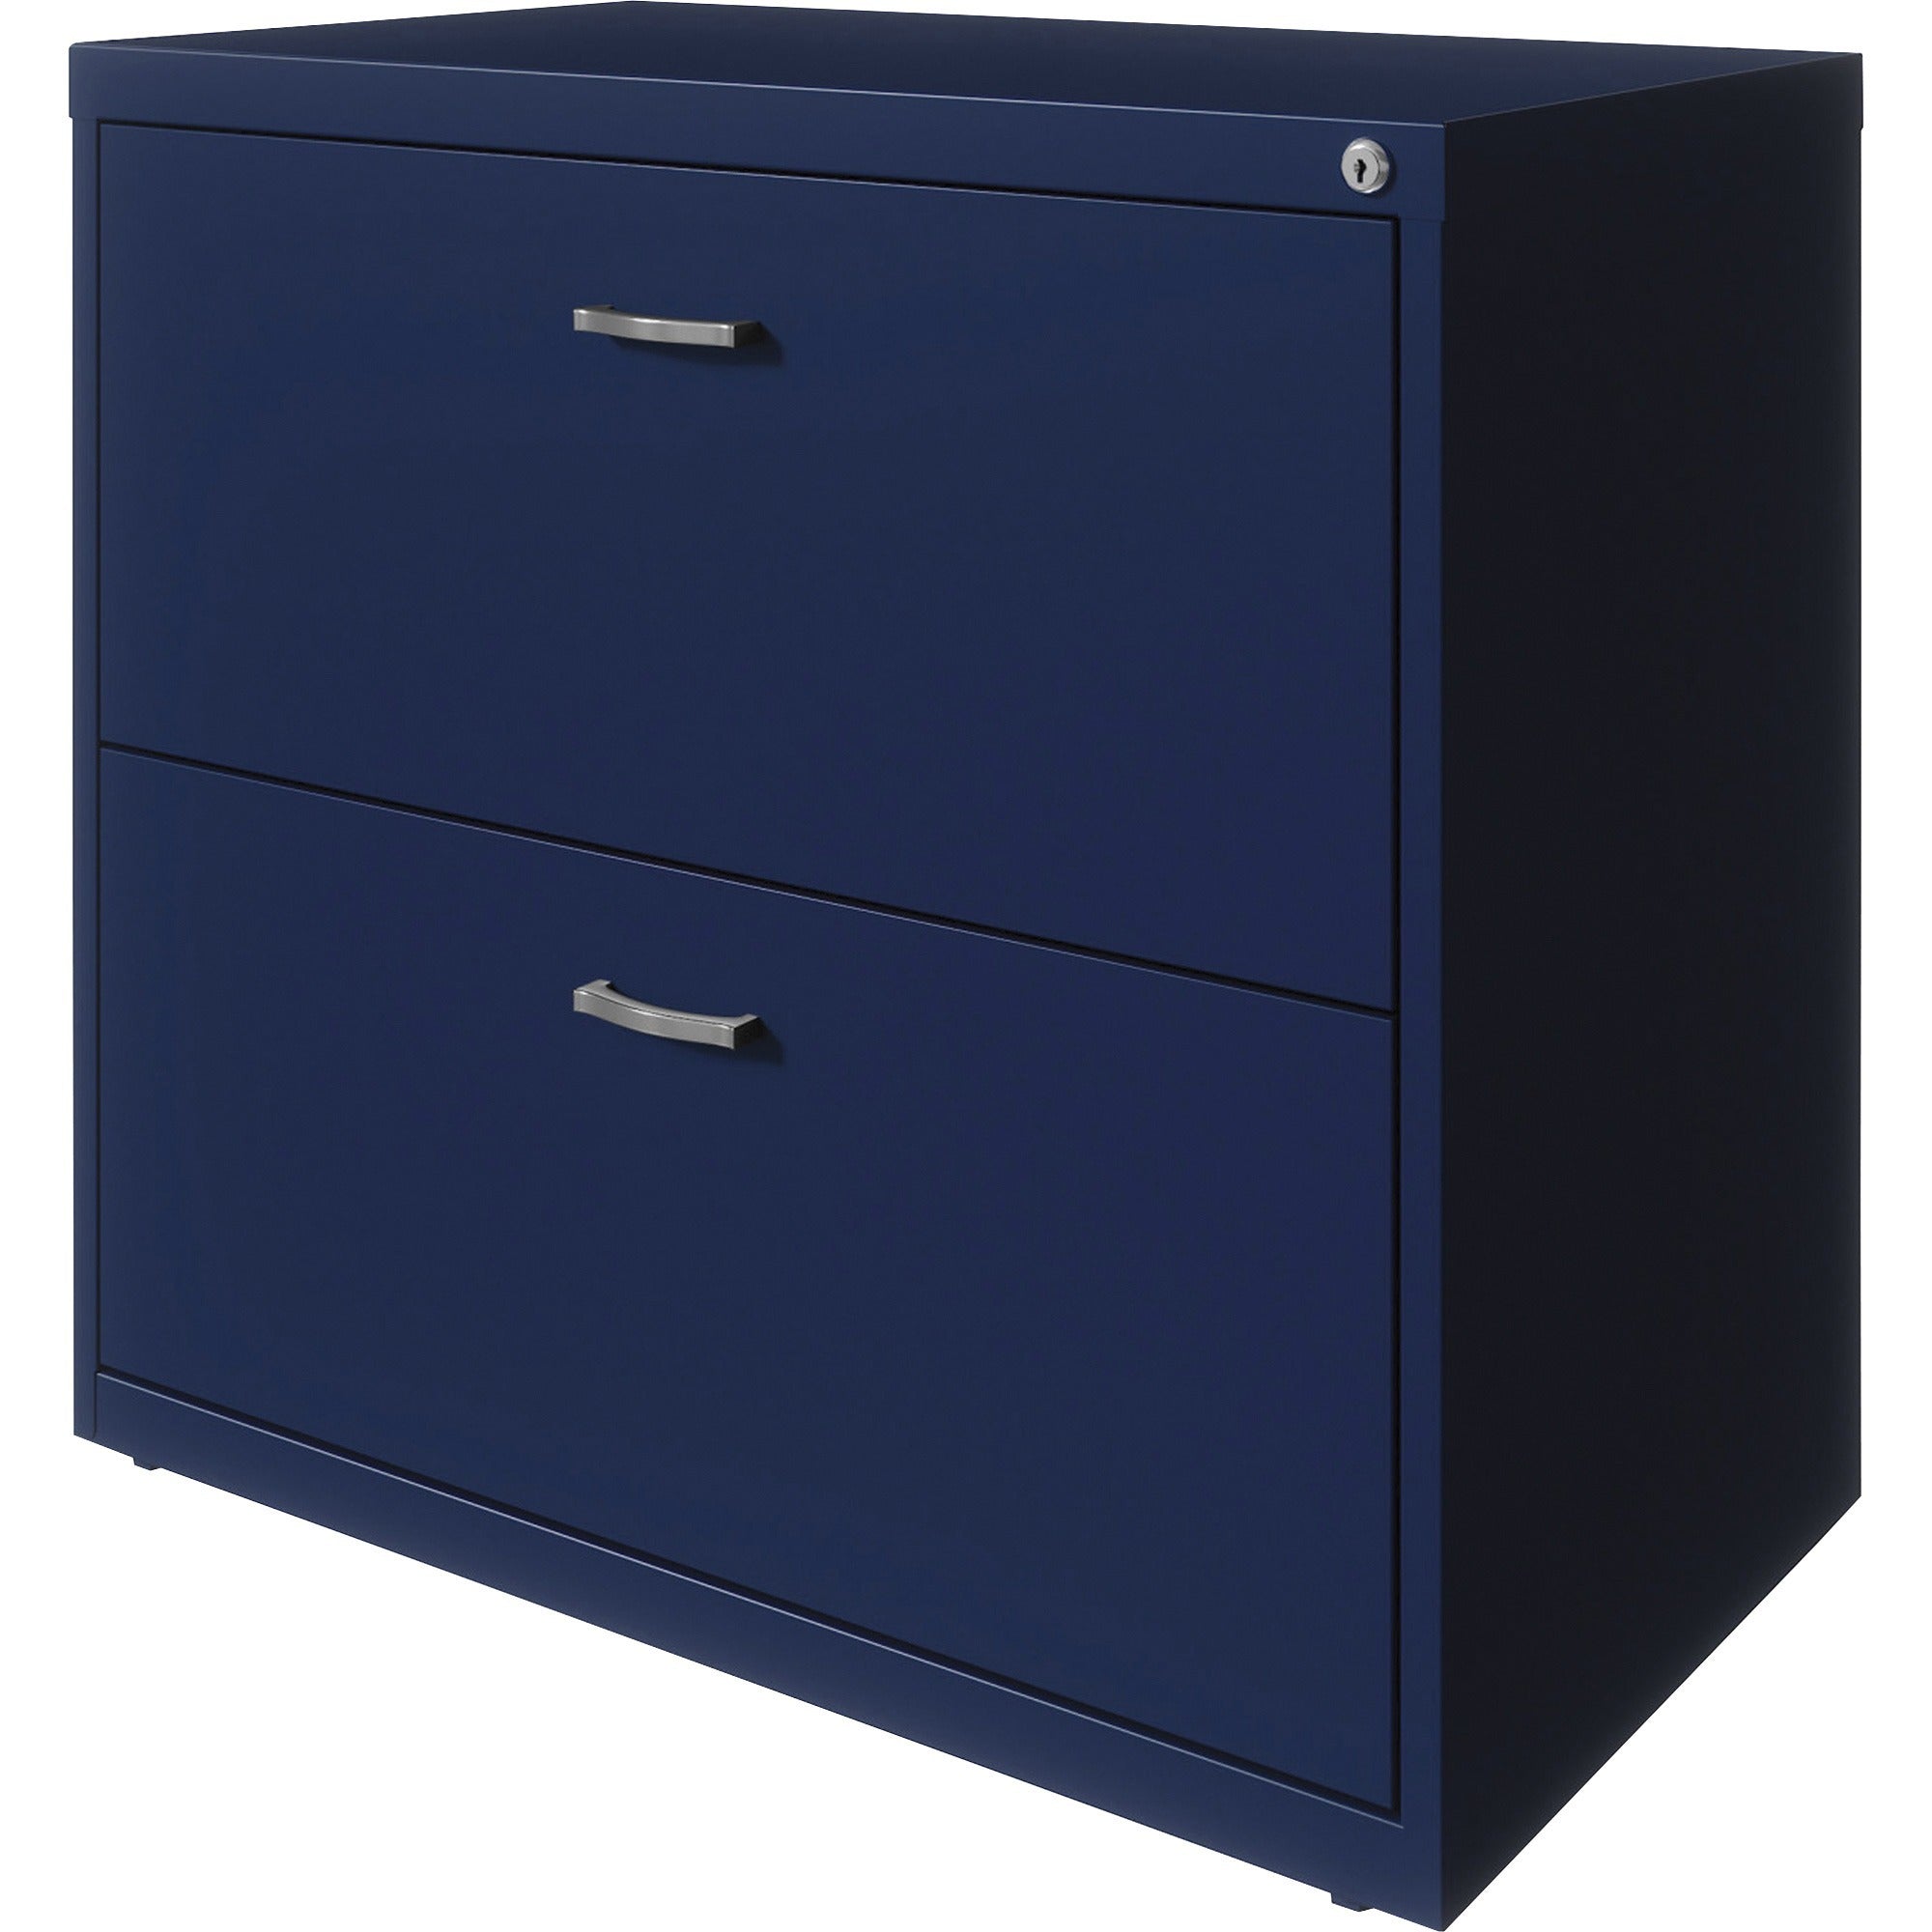 nusparc-2-drawer-lateral-file-30-x-176-x-277-2-x-drawers-for-file-letter-lateral-interlocking-anti-tip-ball-bearing-slide-ball-bearing-suspension-removable-lock-leveling-glide-adjustable-glide-durable-nonporous-surface-blue_nprlf218aany - 3